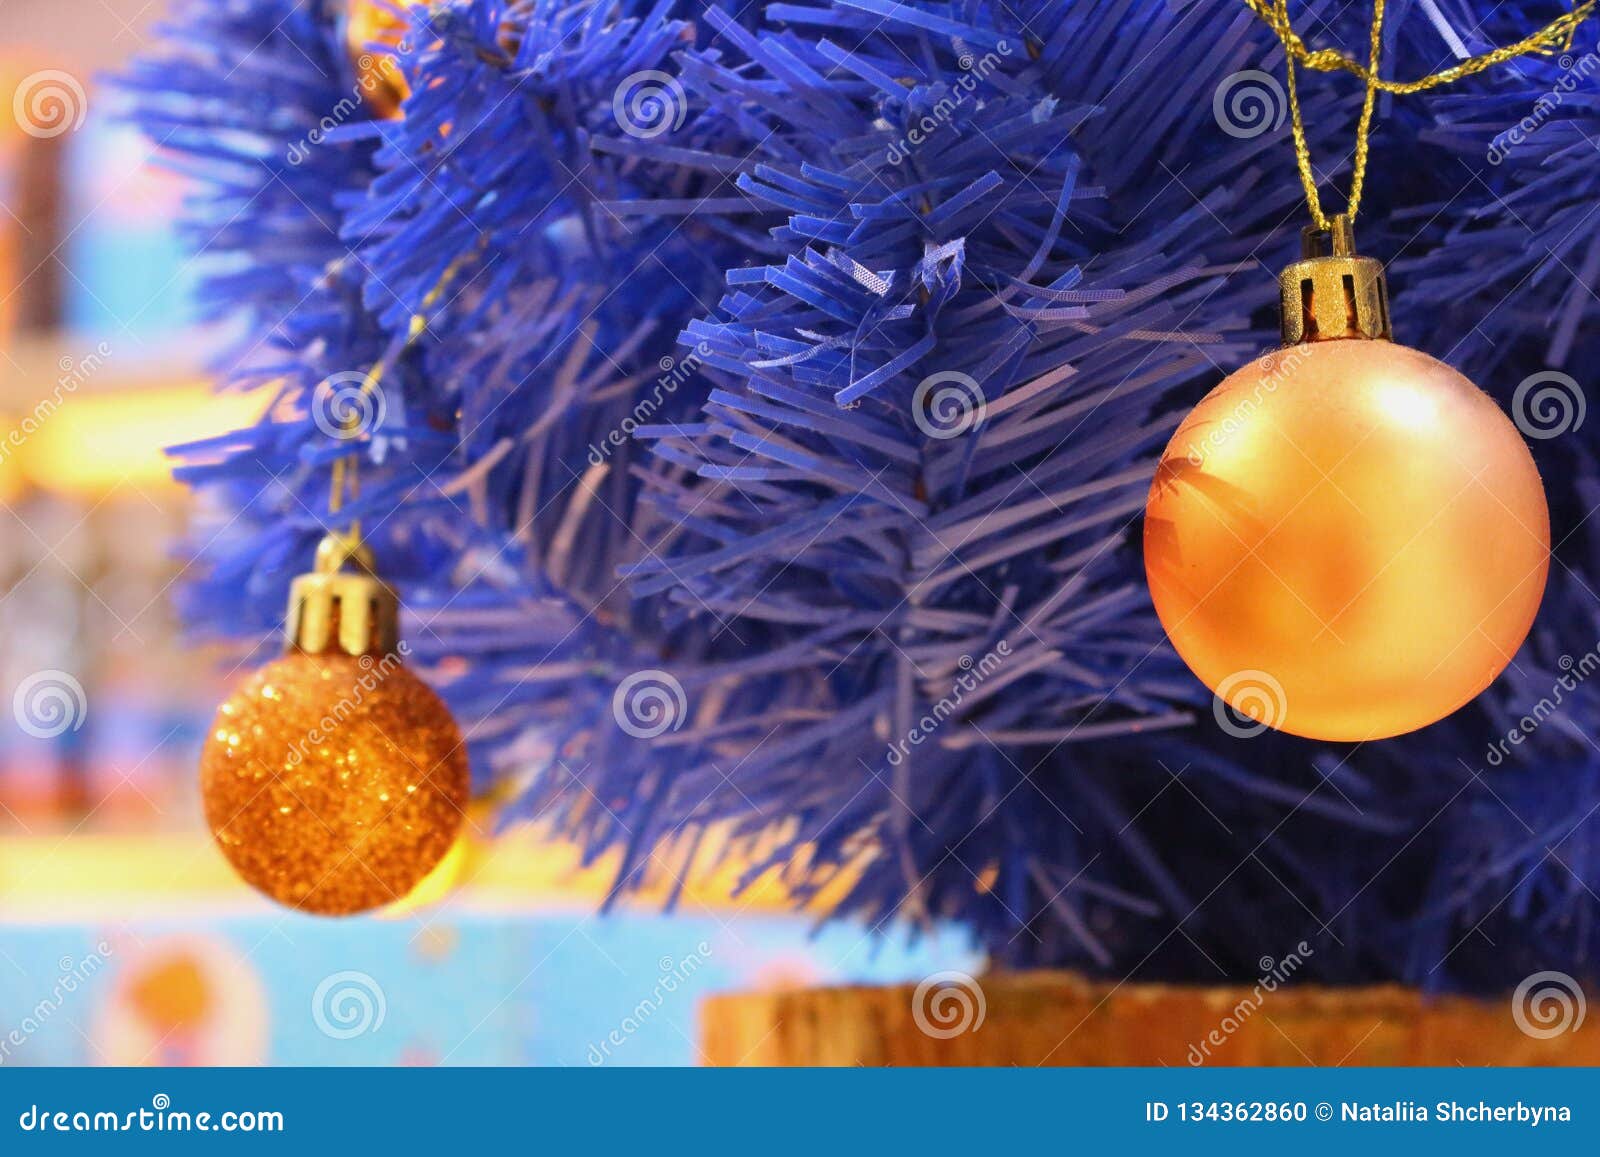 Blue Christmas Tree with Yellow Bulbs. Blue Artificial Pine Tree Branch ...